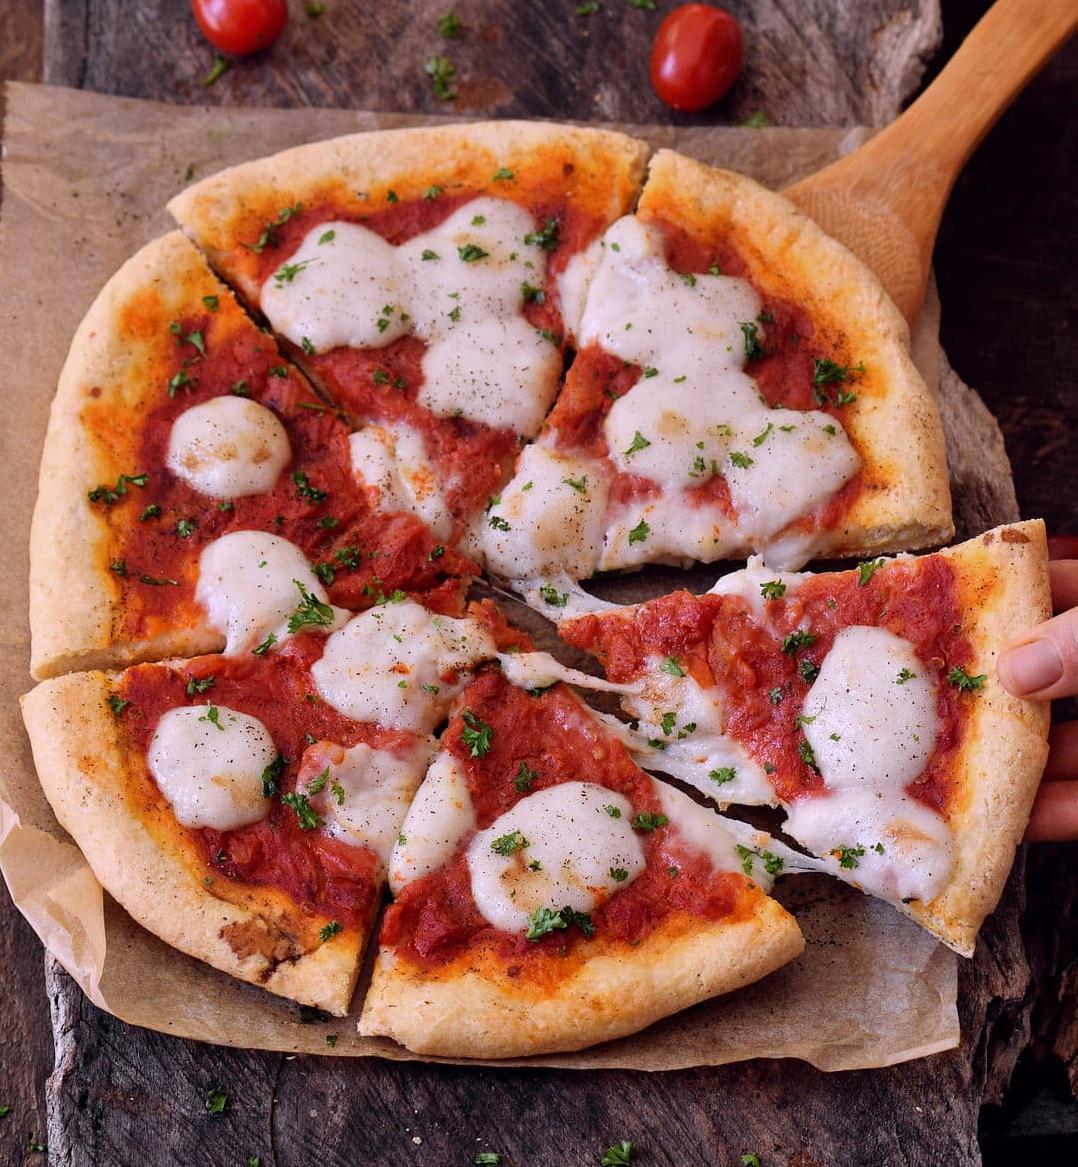  This gluten-free pizza crust is a game-changer